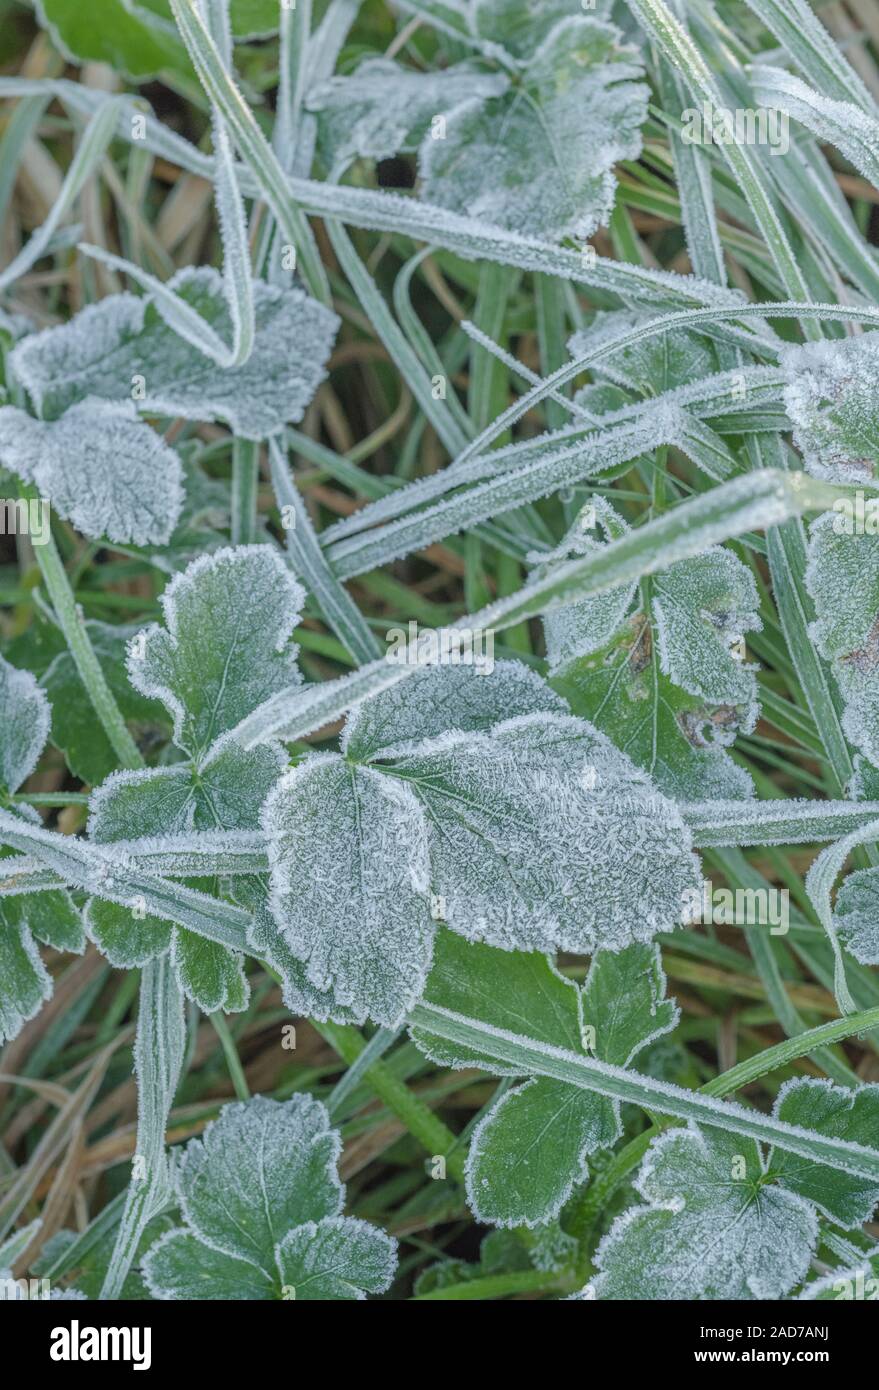 Collapsed & wilted Alexanders leaves / Smyrnium olusatrum frozen by hard winter frost, possibly causing intercellular freezing within th frosty leaves Stock Photo